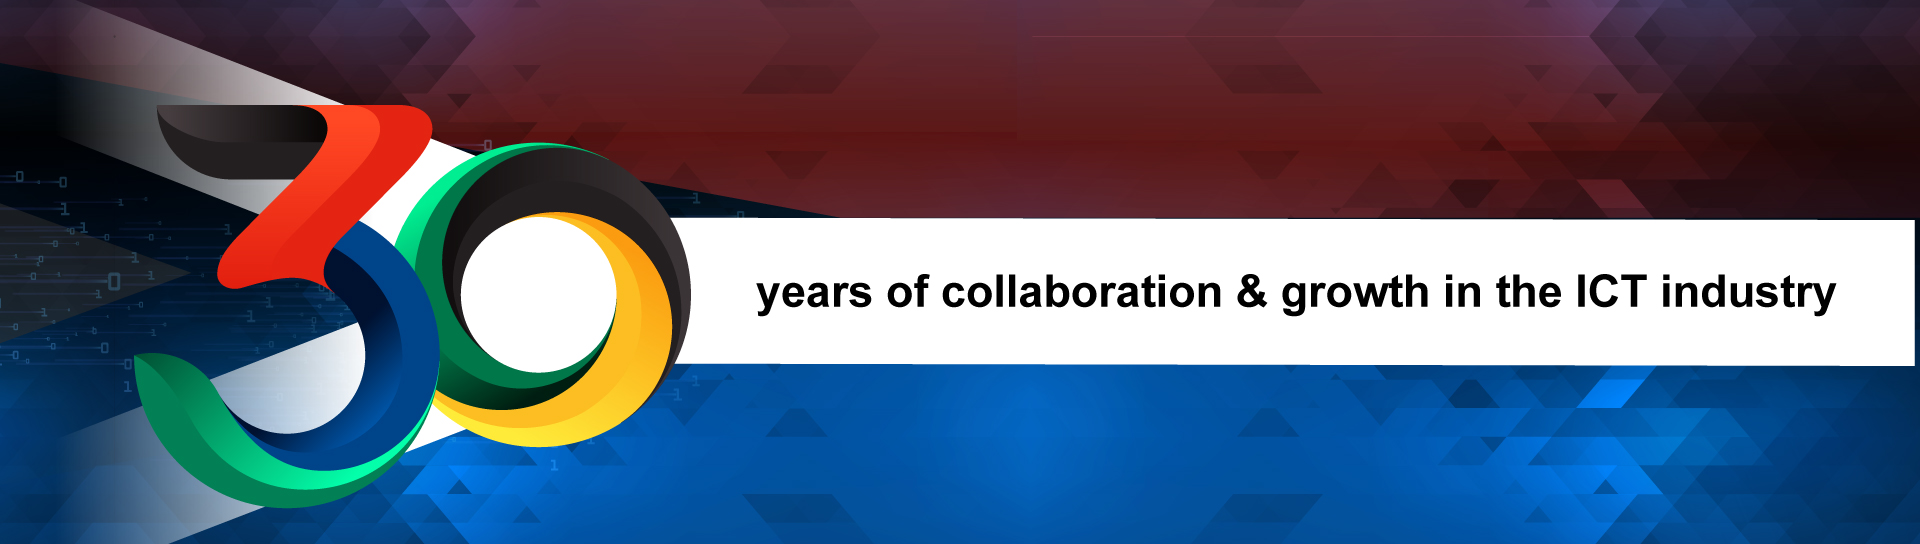 30 years of collaboration